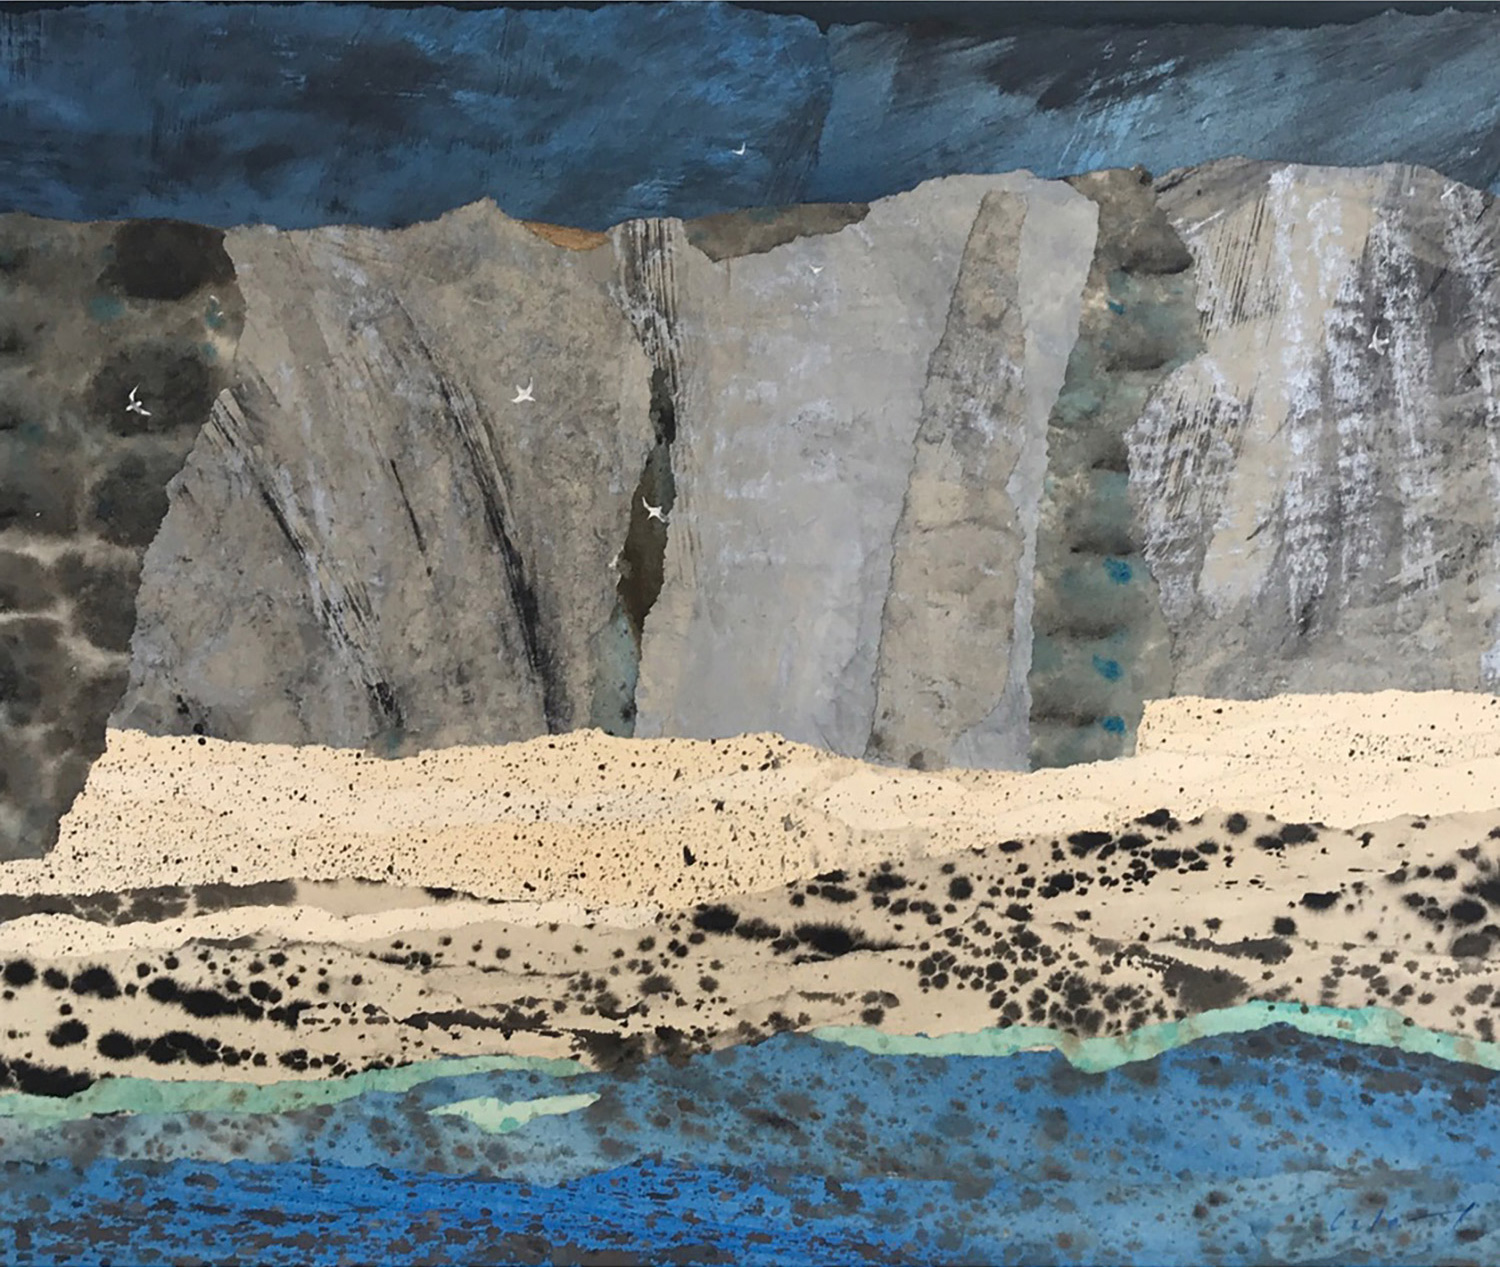 Marzia Colonna 11. Cliffs during the storm 50 x 60 cm collage £4,000